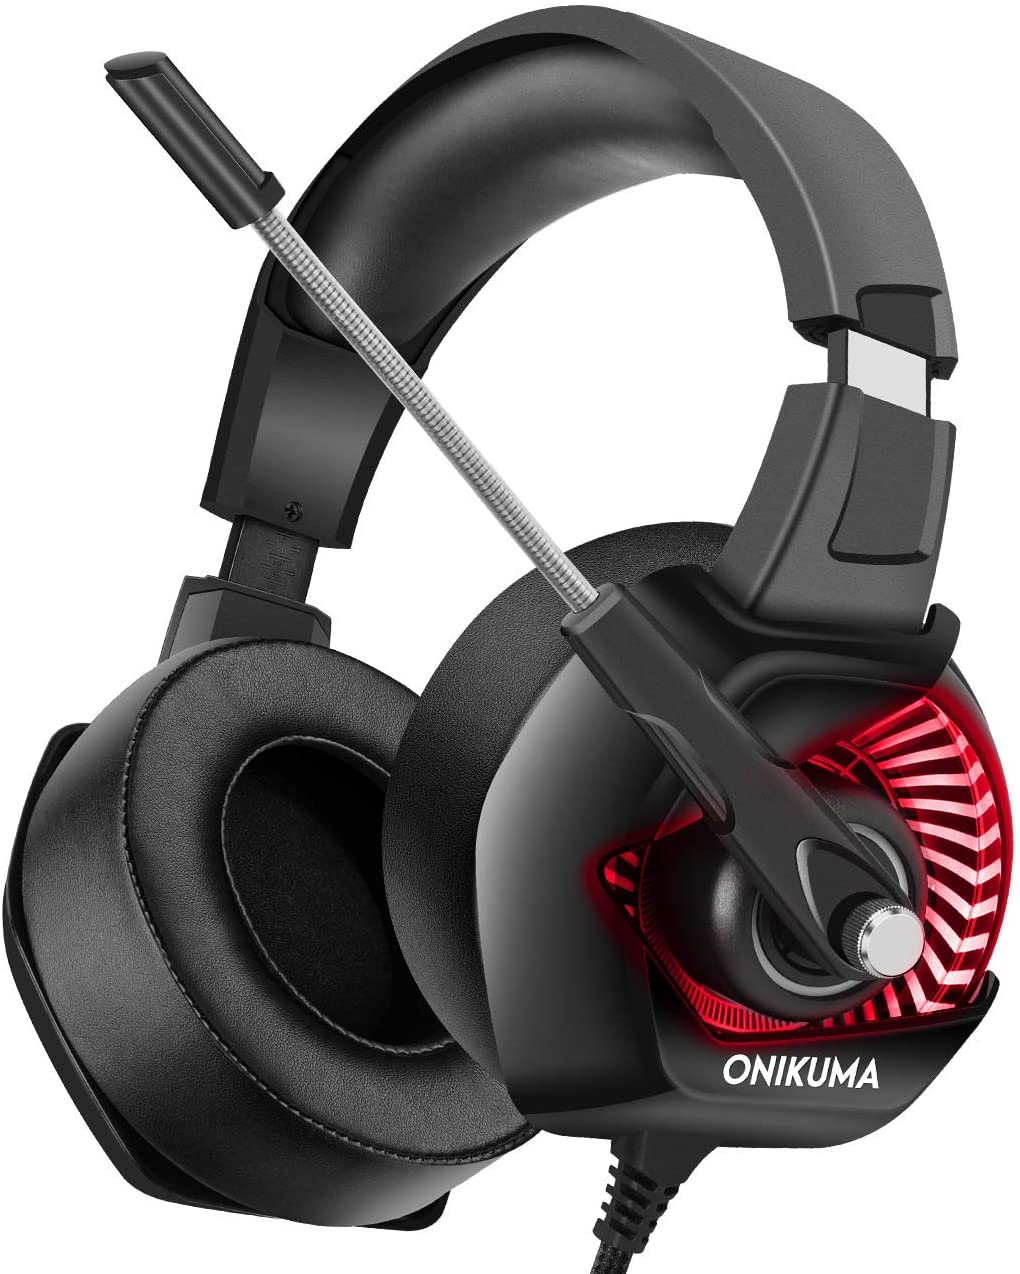 ONIKUMA Gaming Headset for PC, PS4, Xbox One, Stereo Gaming Headphones with 7.1 Surround Sound, Noise Cancelling Mic, LED Lights, Soft Ear Pads, Volume Control for Mac, Laptop, Nintendo Switch - Red